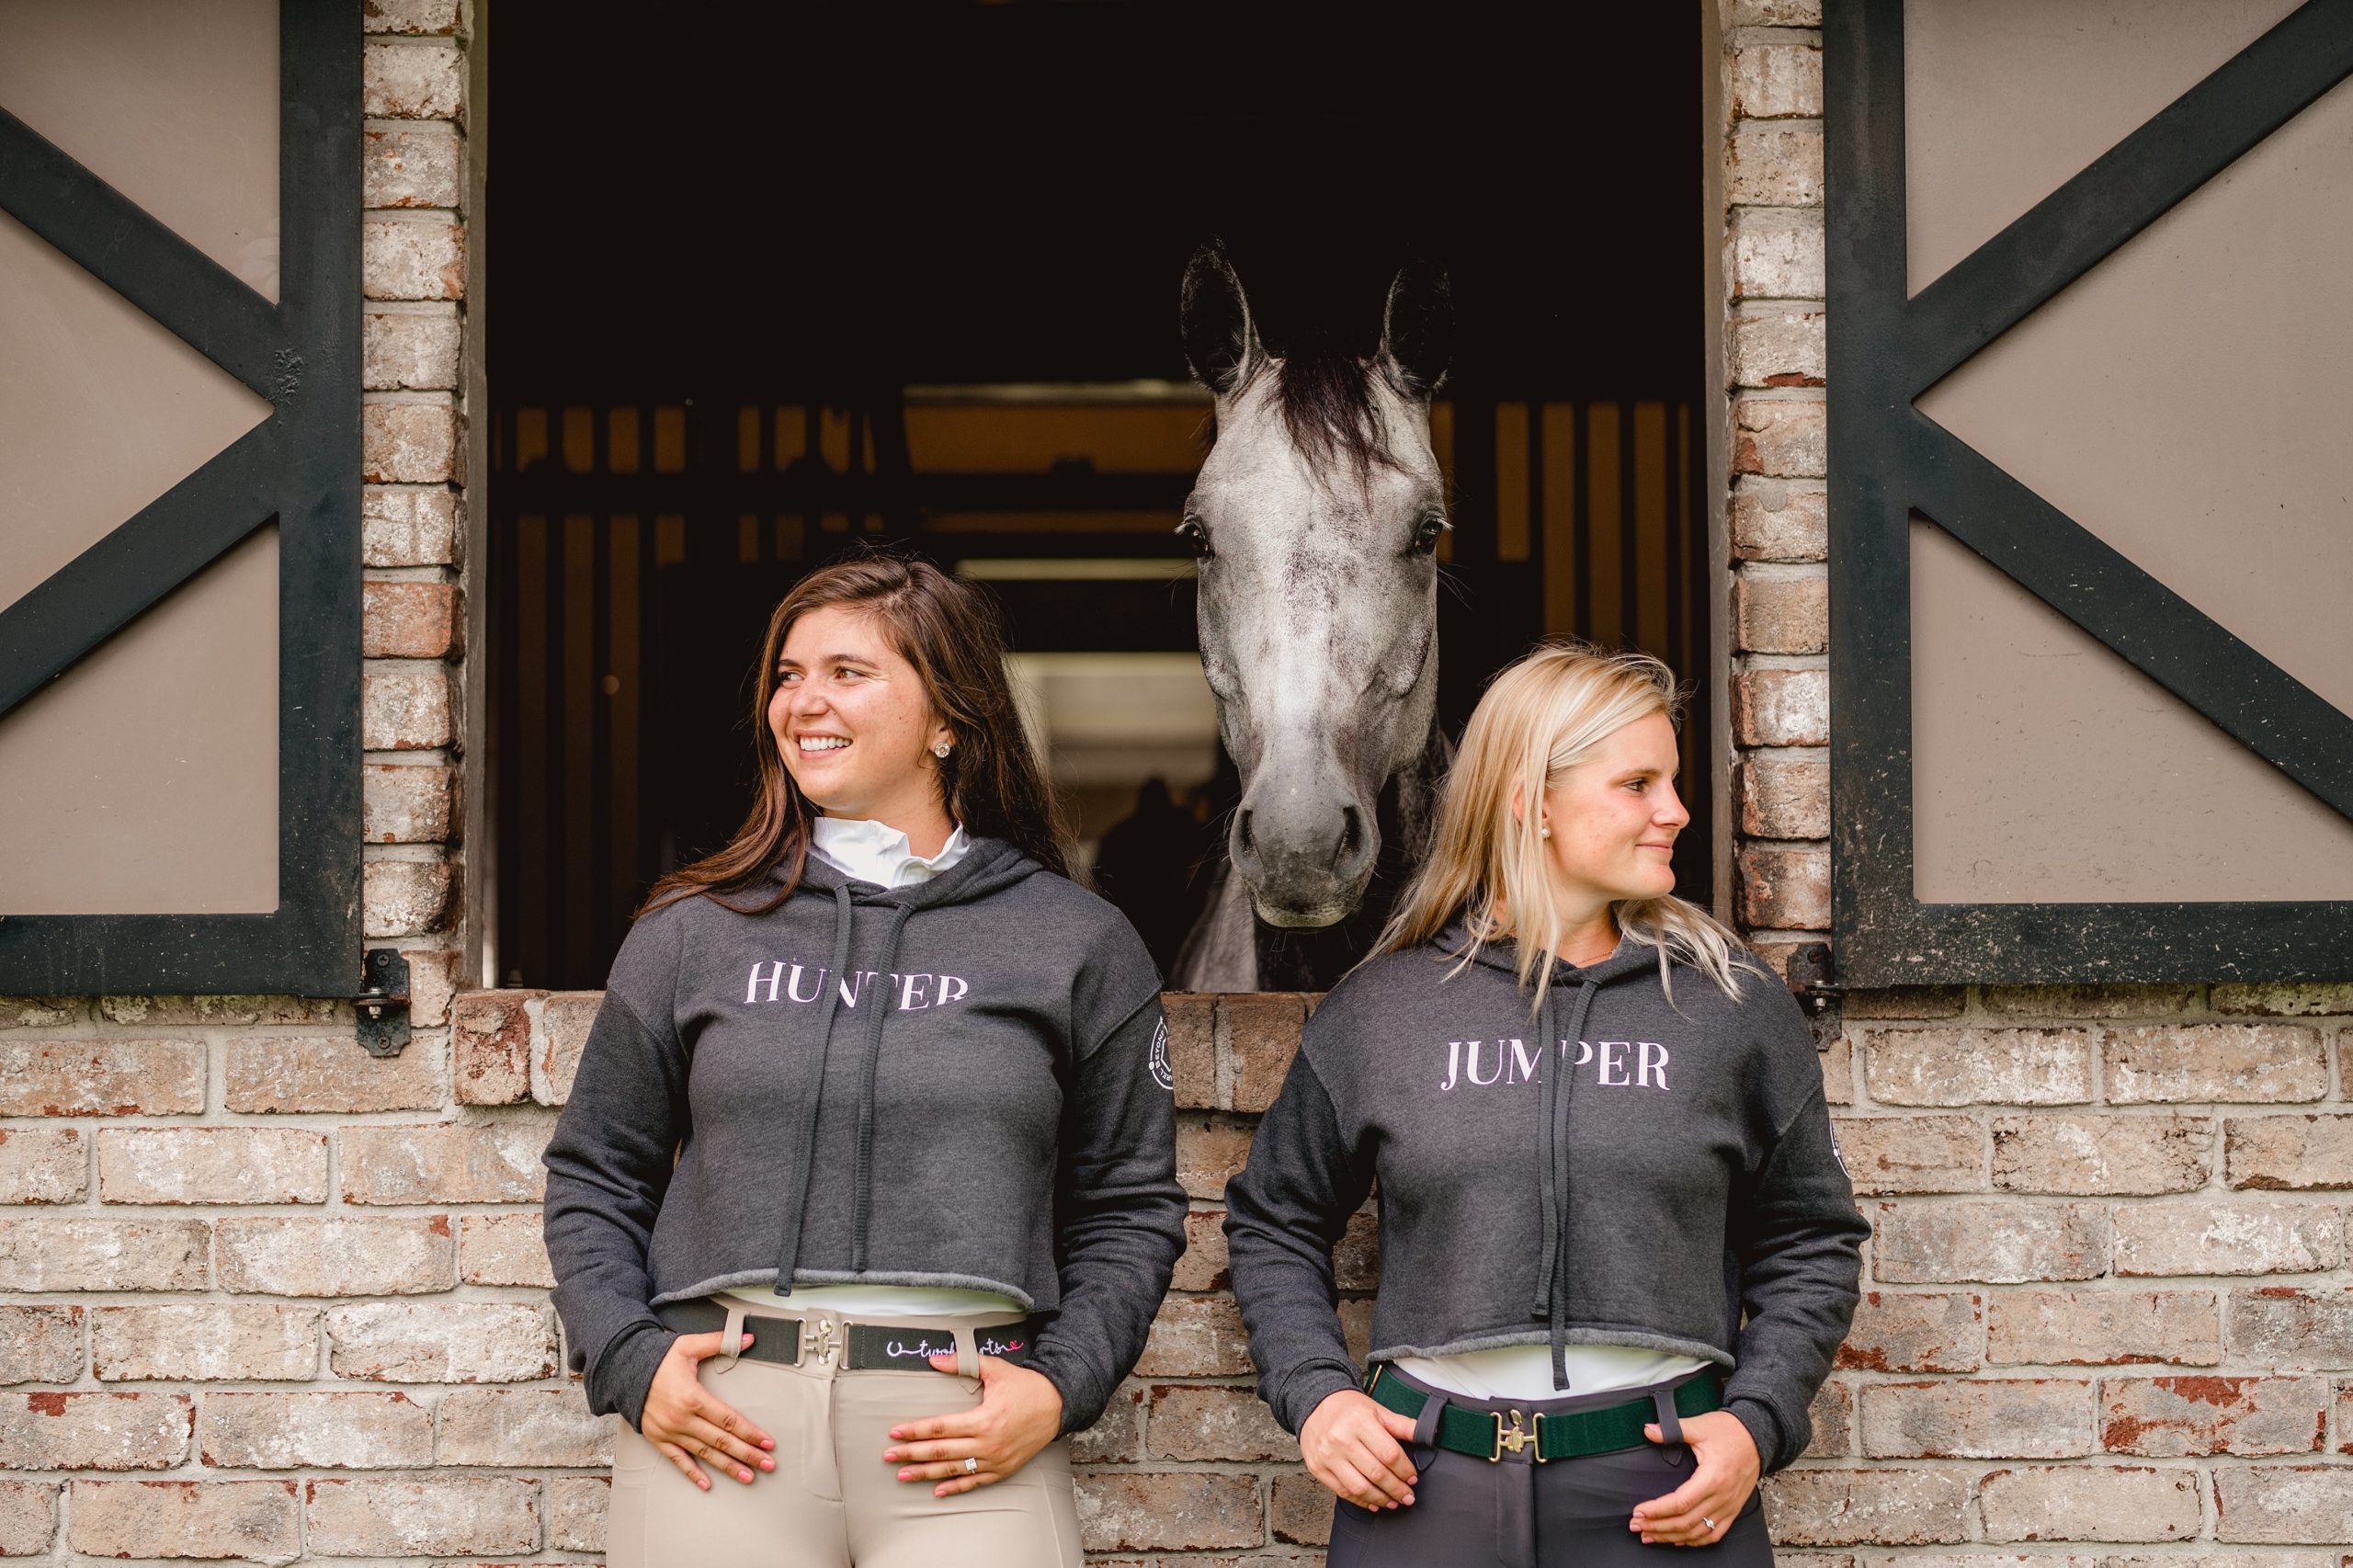 Custom equestrian brand photography for Beyond the Track Apparel in Ocala, FL.